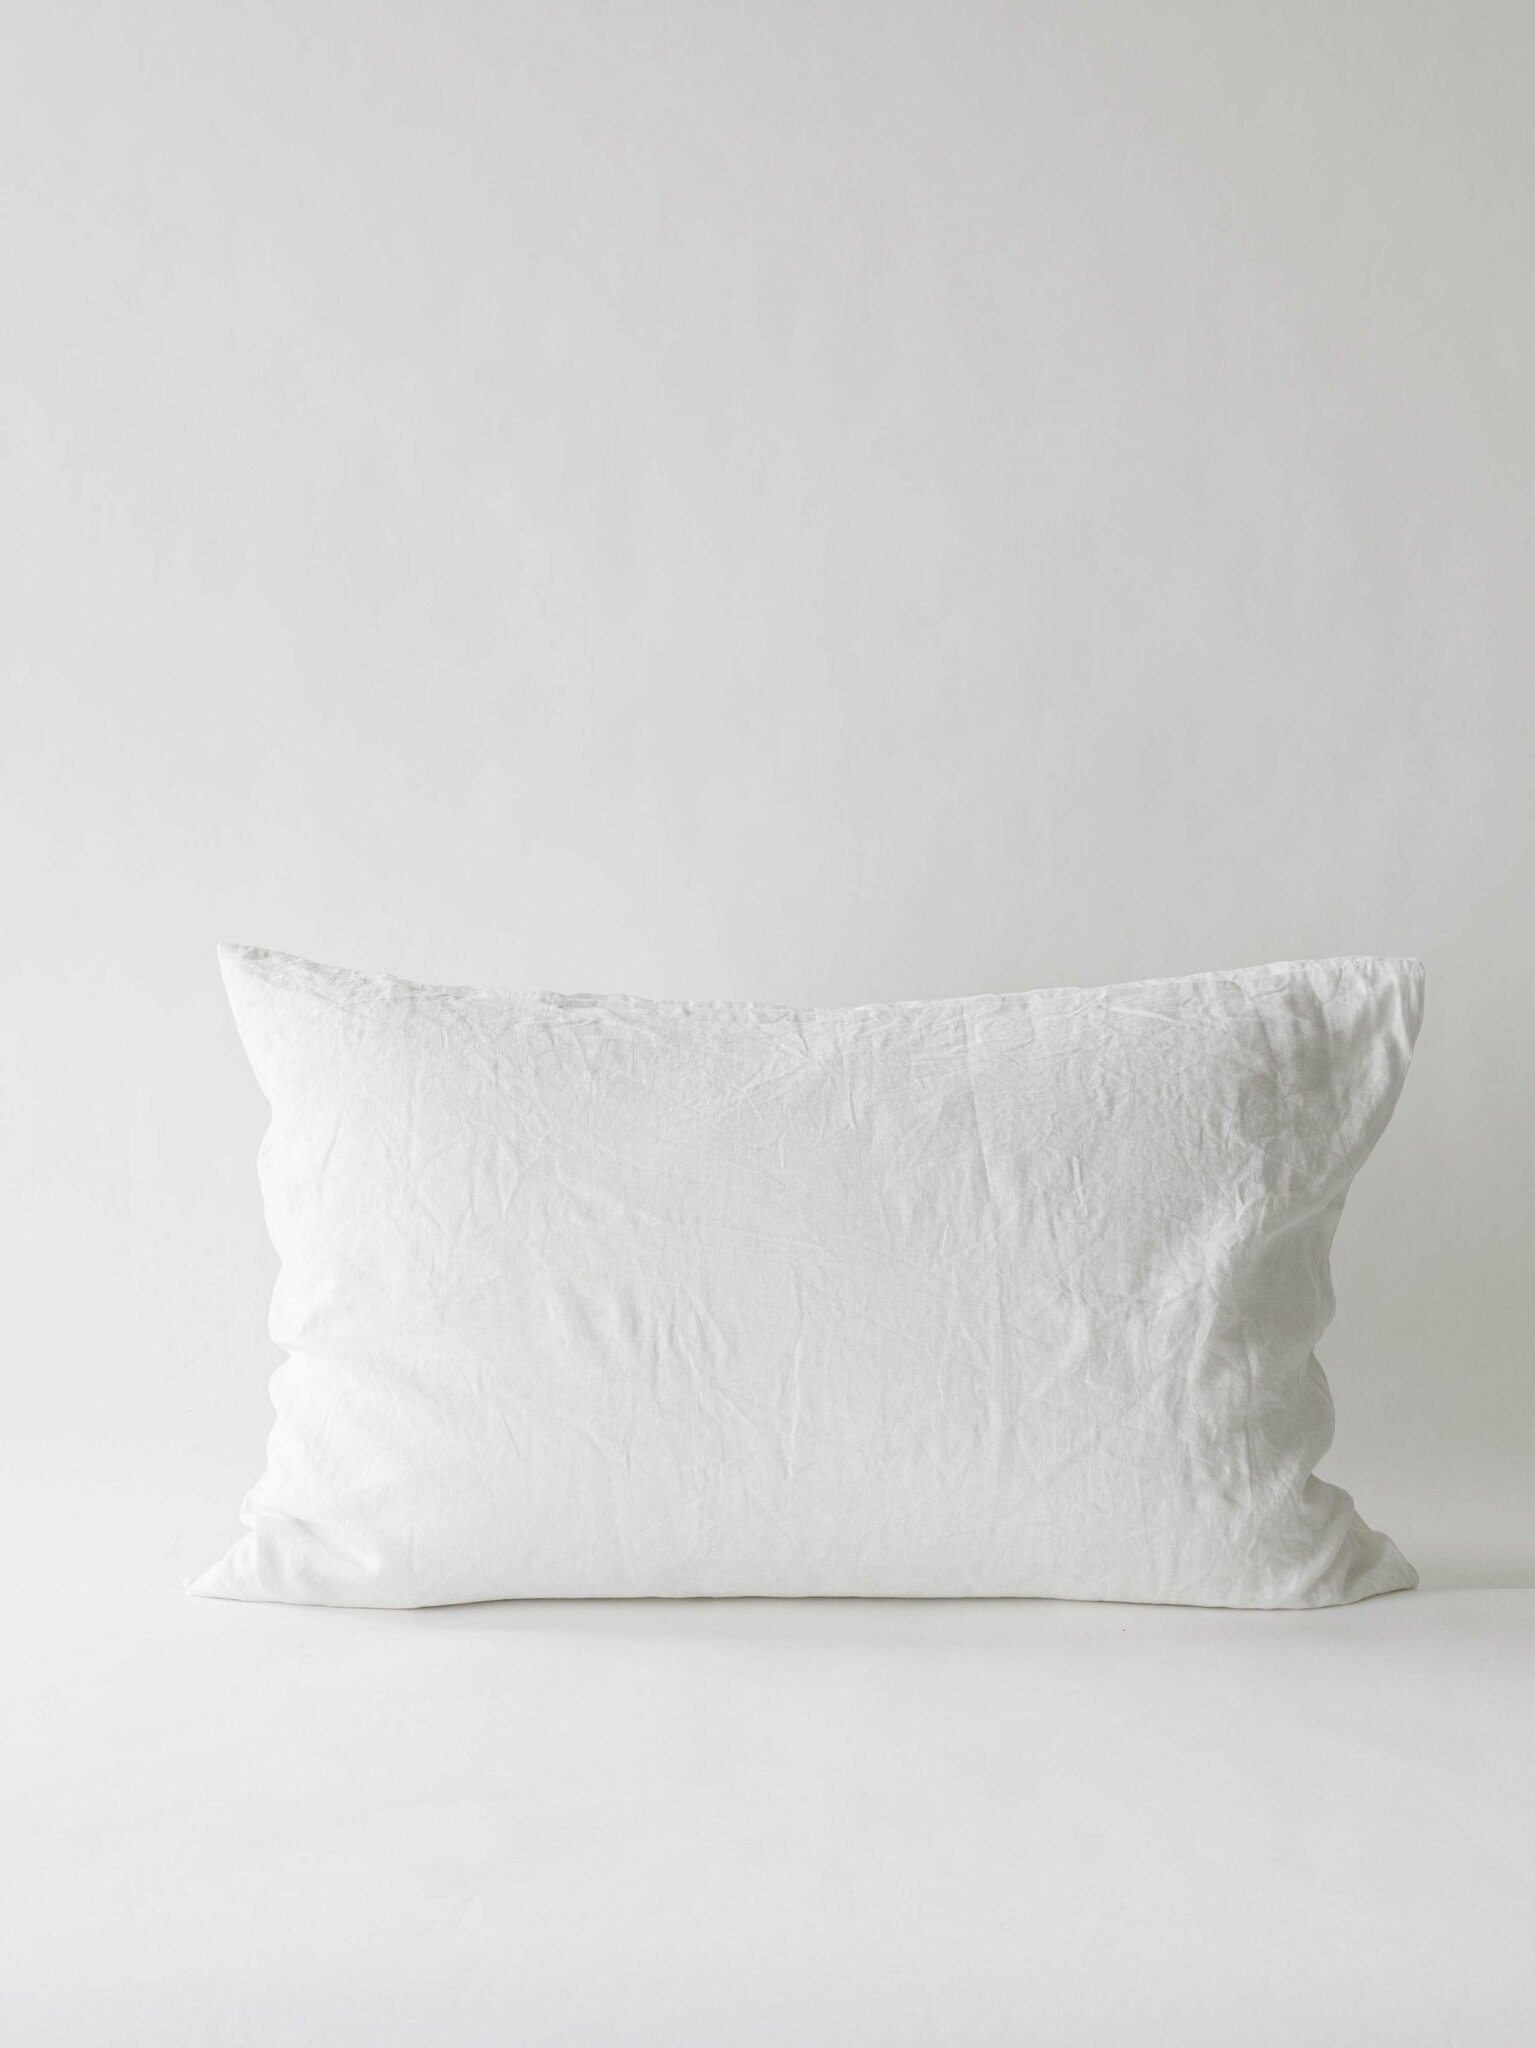 Washed linen kuddfodral - Bleached white 60x90